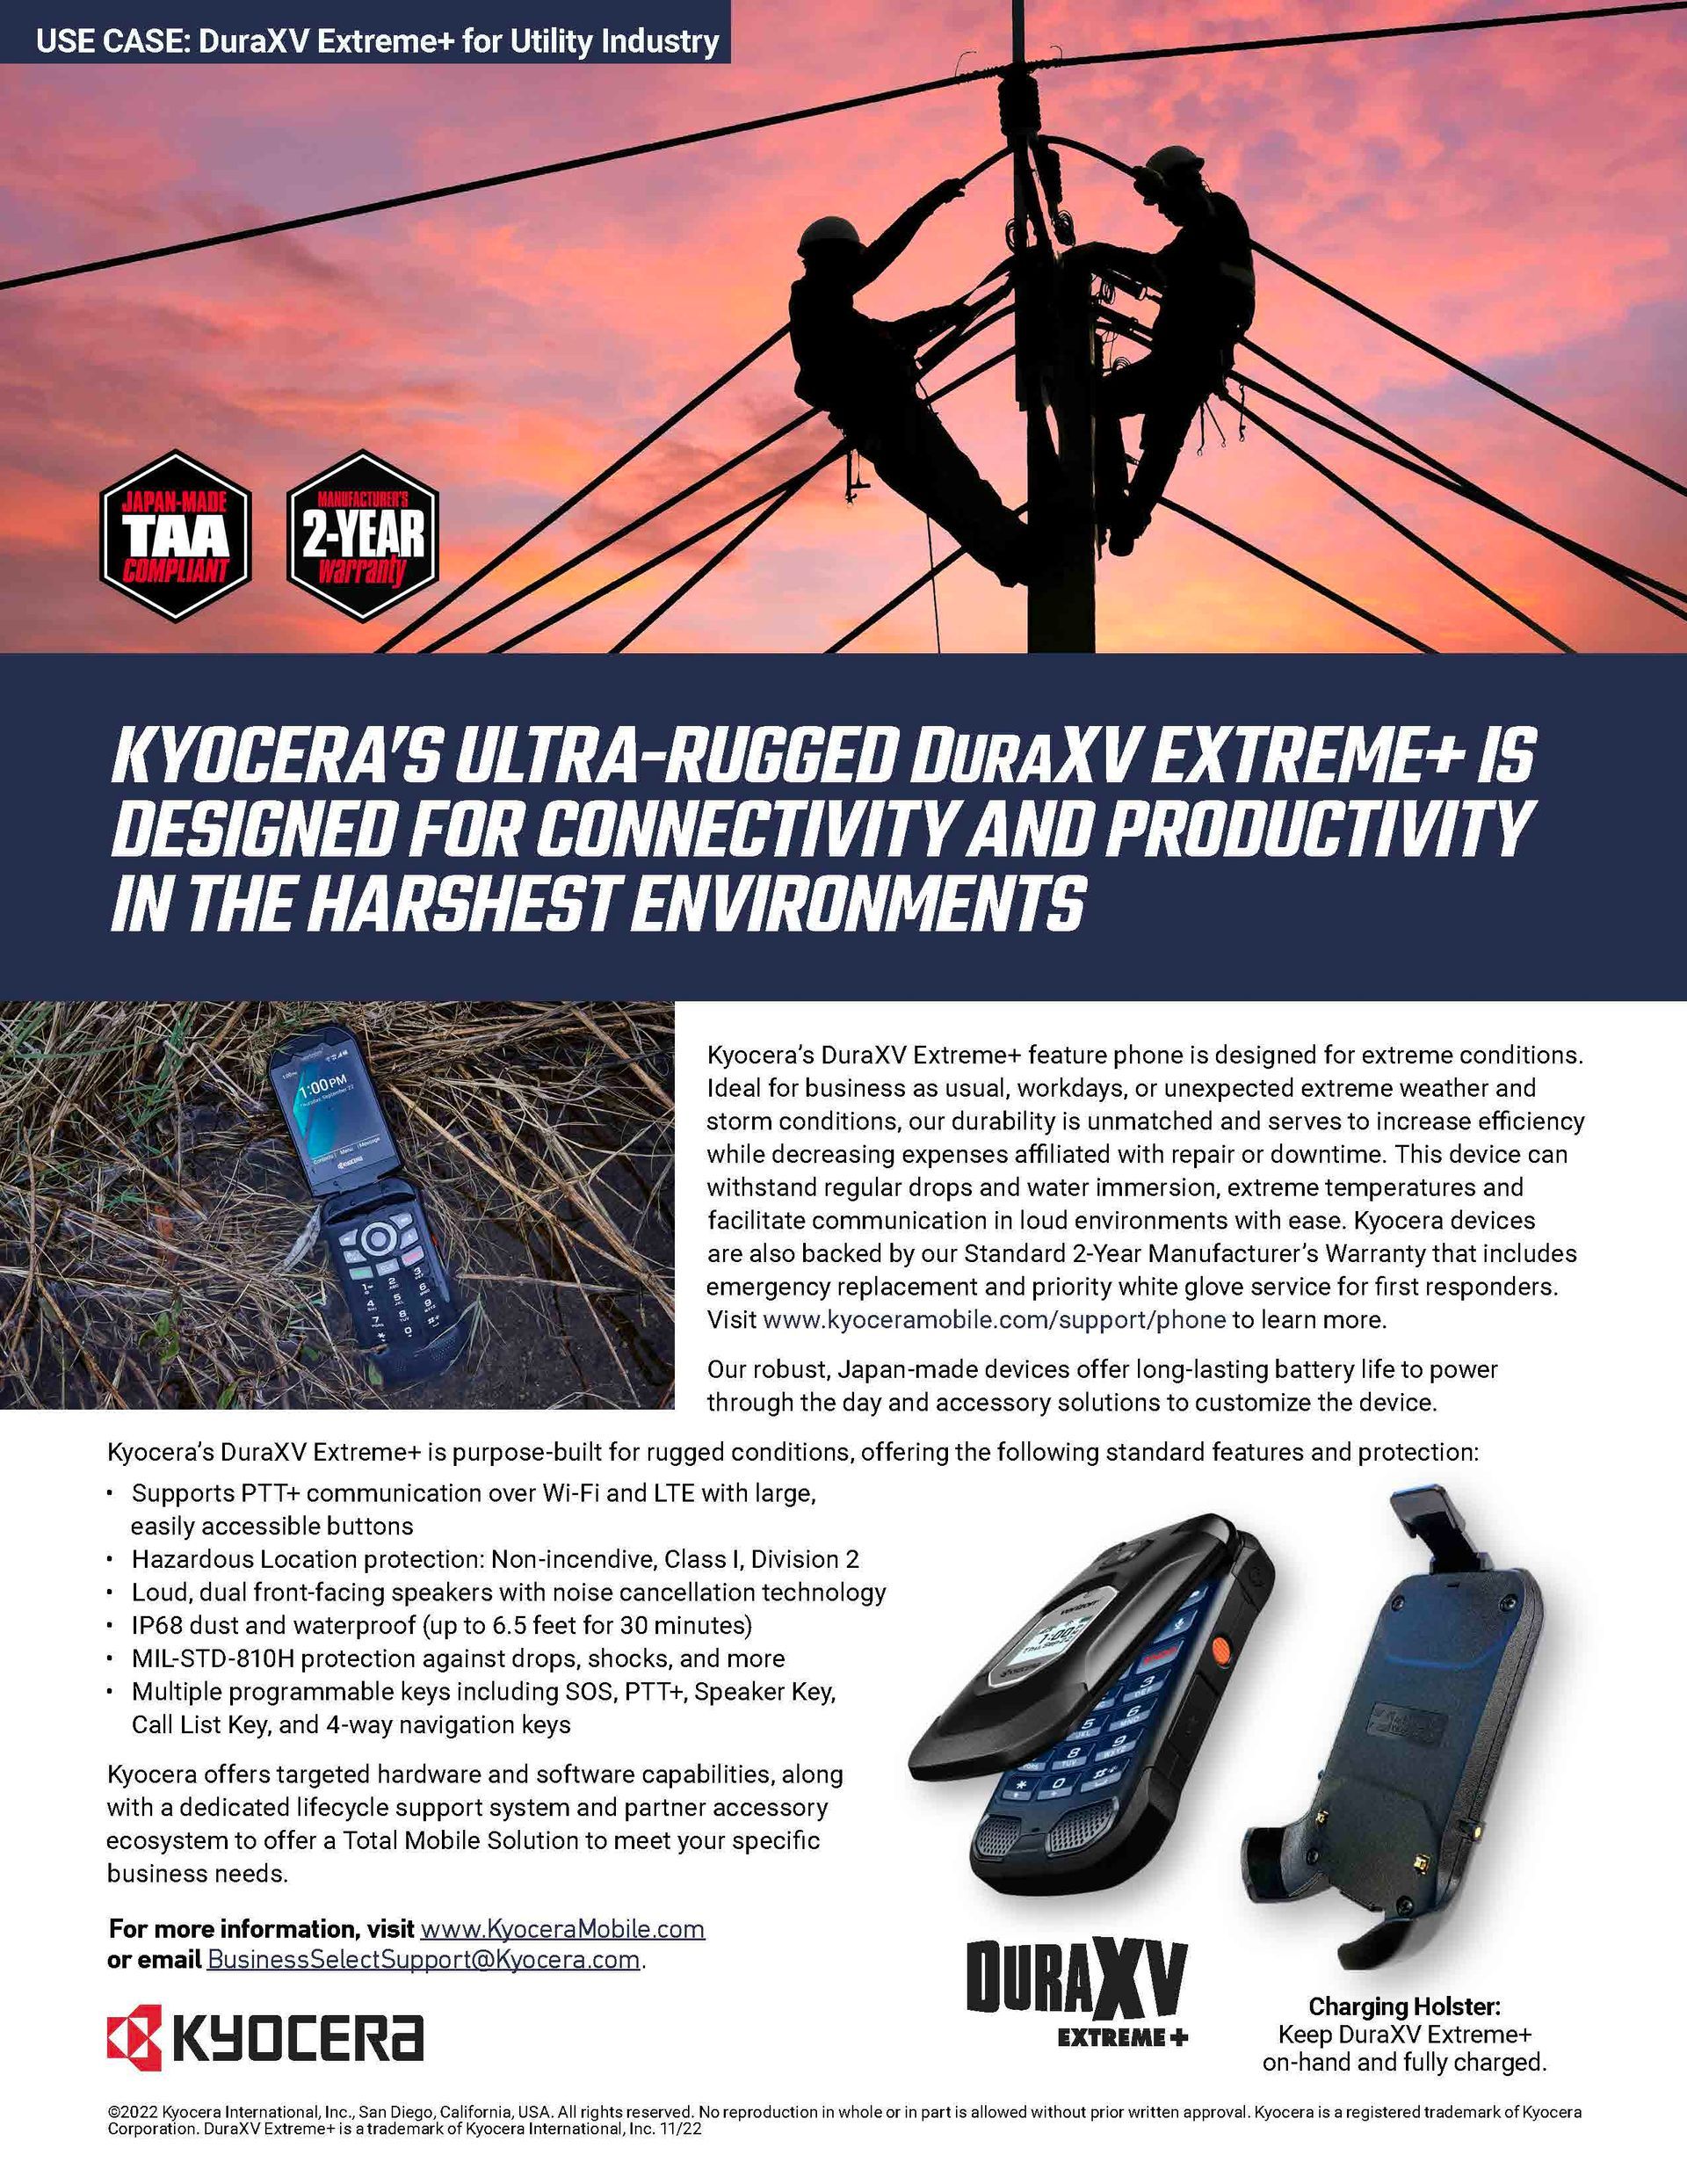 A brochure for kyocera 's ultra-rugged dual xv extreme is designed for connectivity and productivity